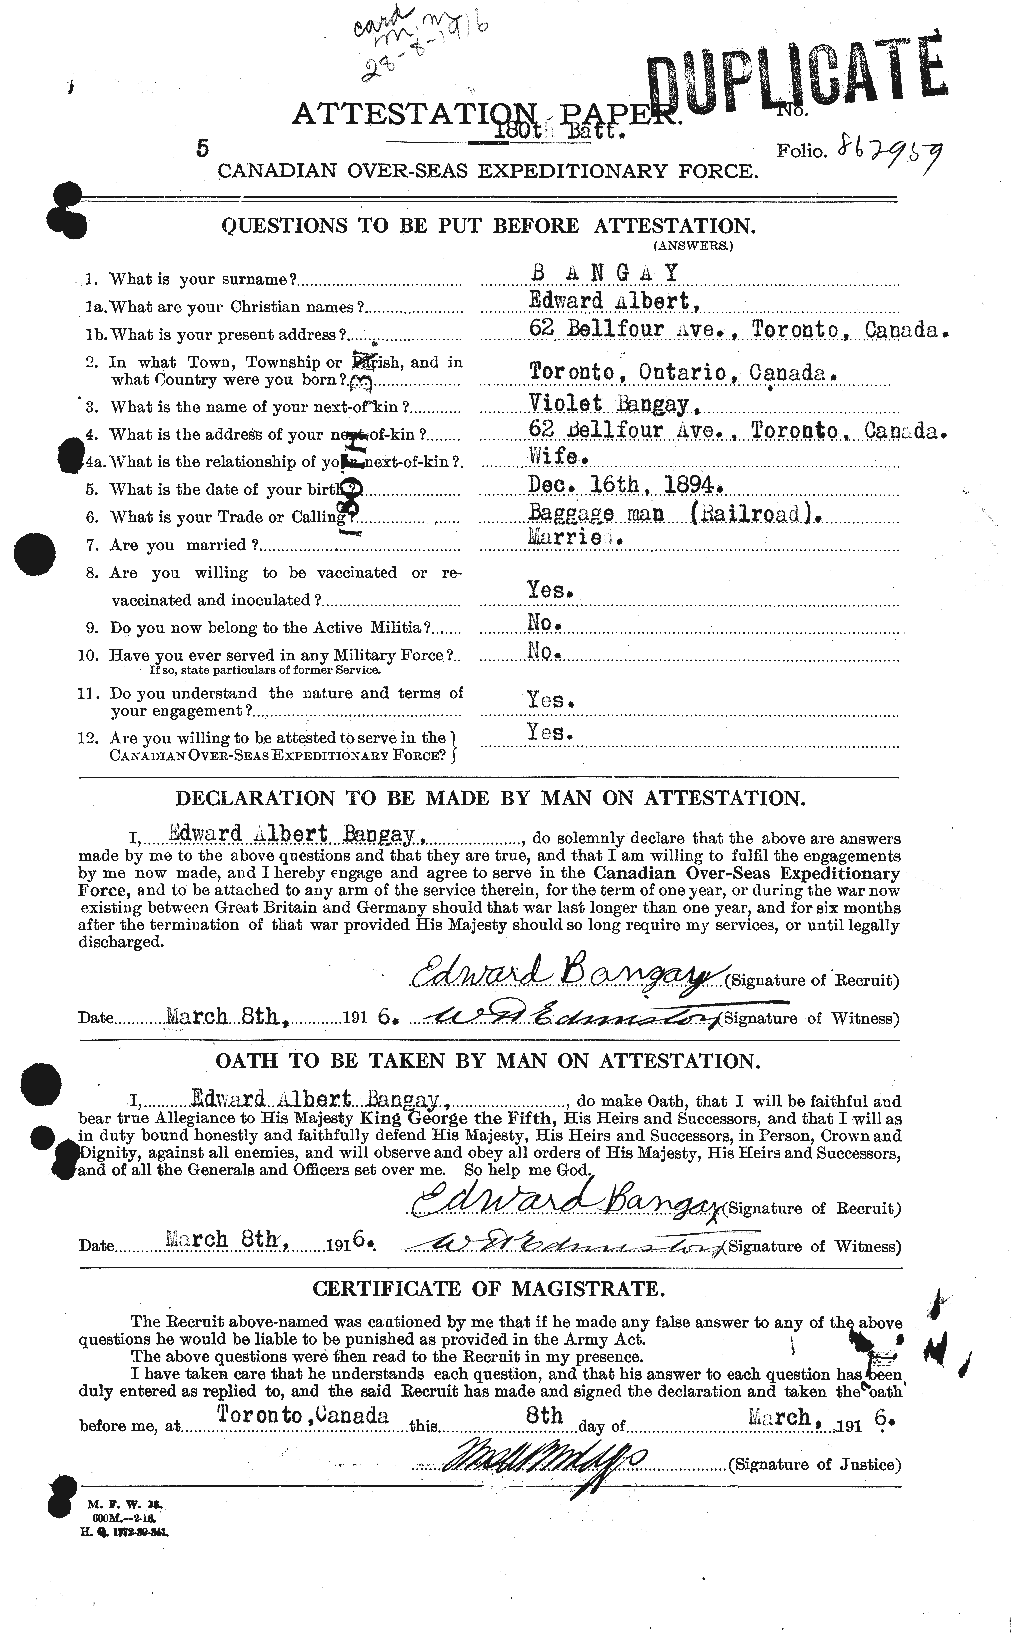 Personnel Records of the First World War - CEF 219333a